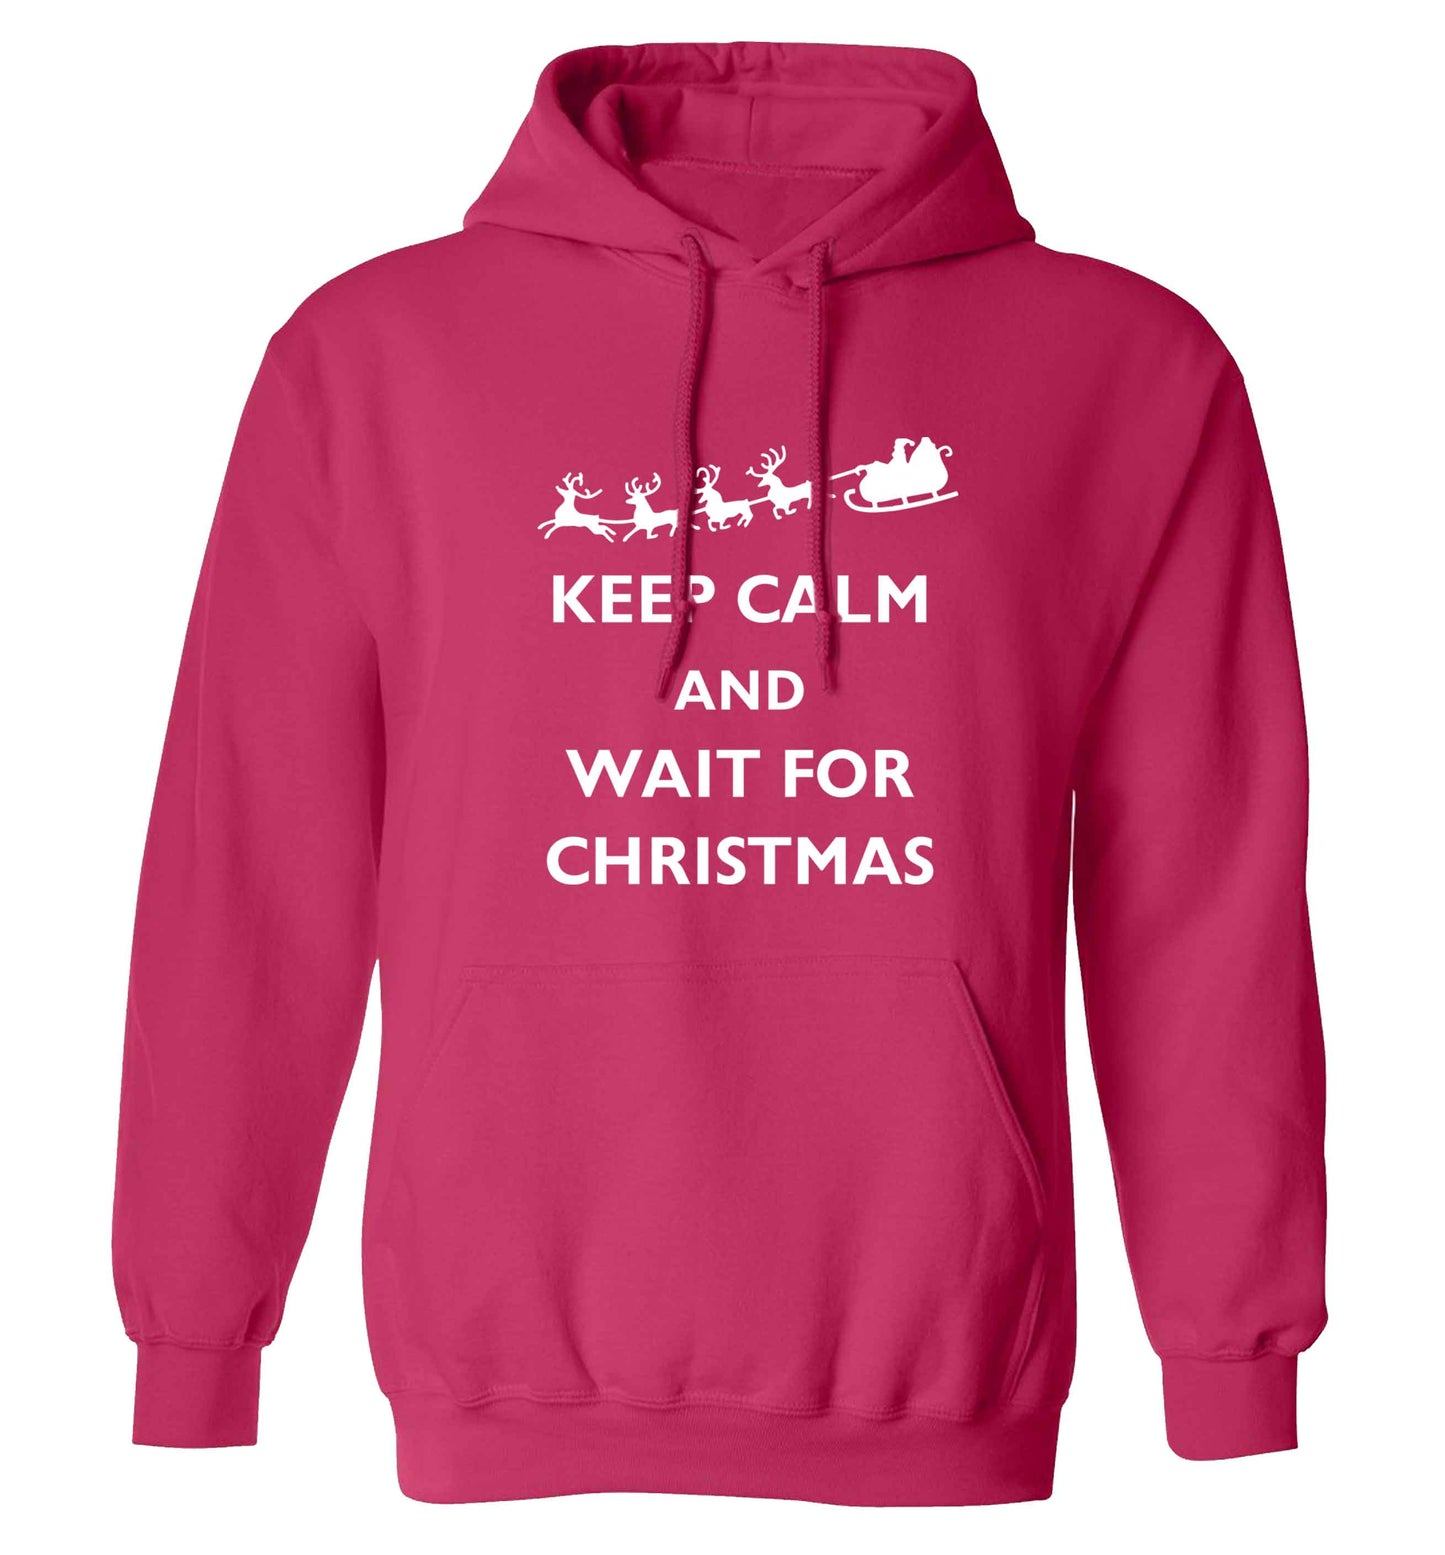 Keep calm and wait for Christmas adults unisex pink hoodie 2XL